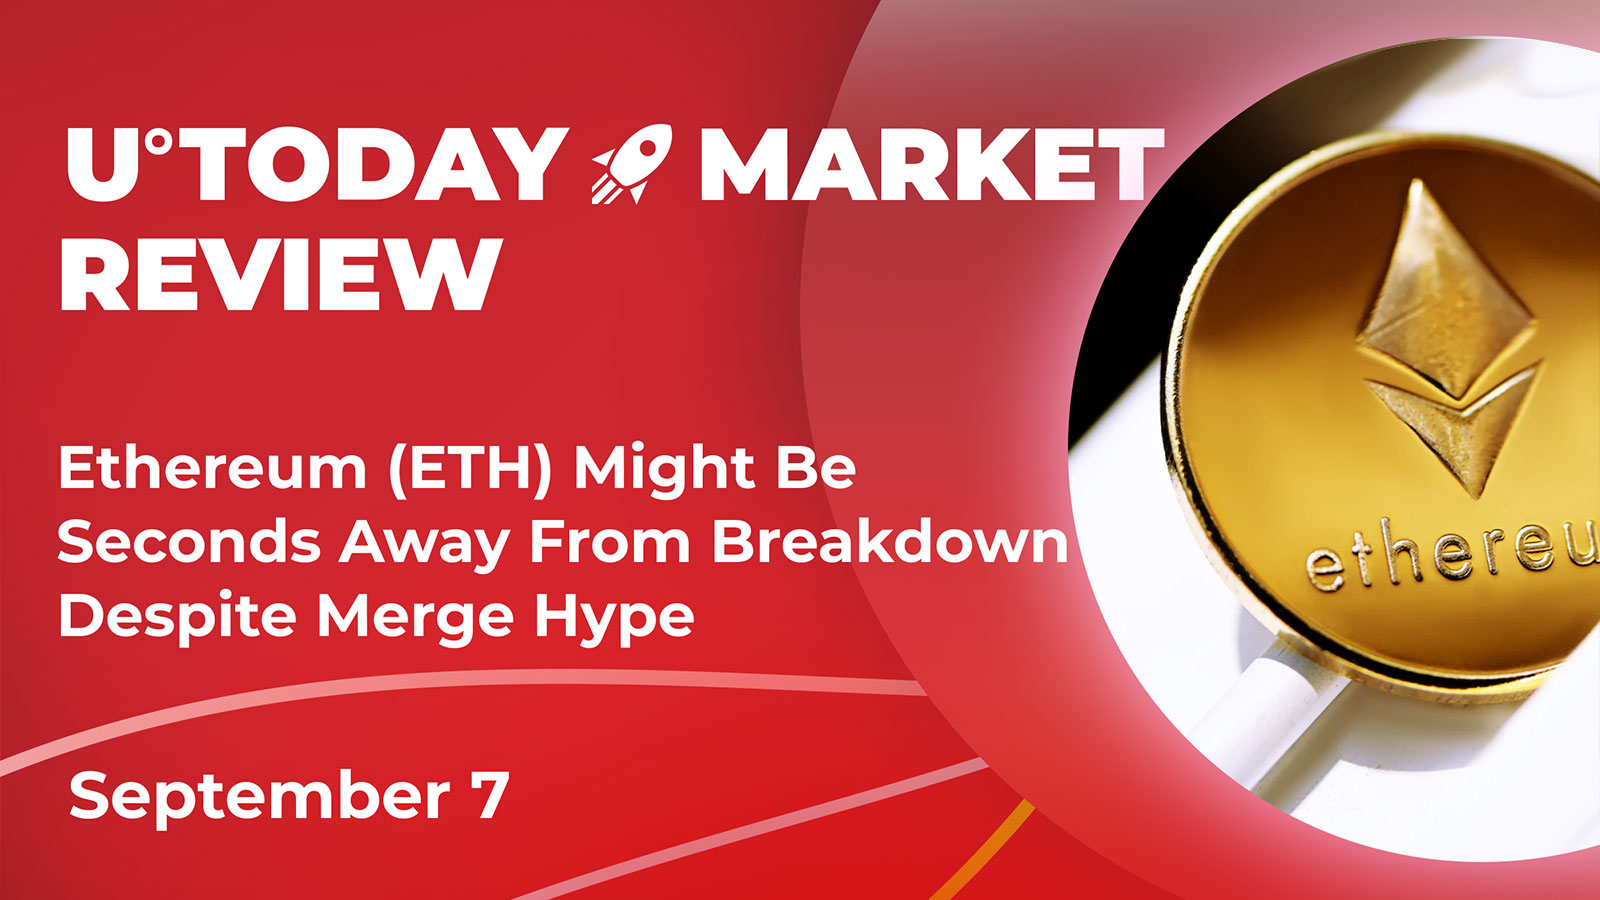 Ethereum (ETH) Might Be Seconds Away From Breakdown Despite Merge Hype: Crypto Market Review, September 7